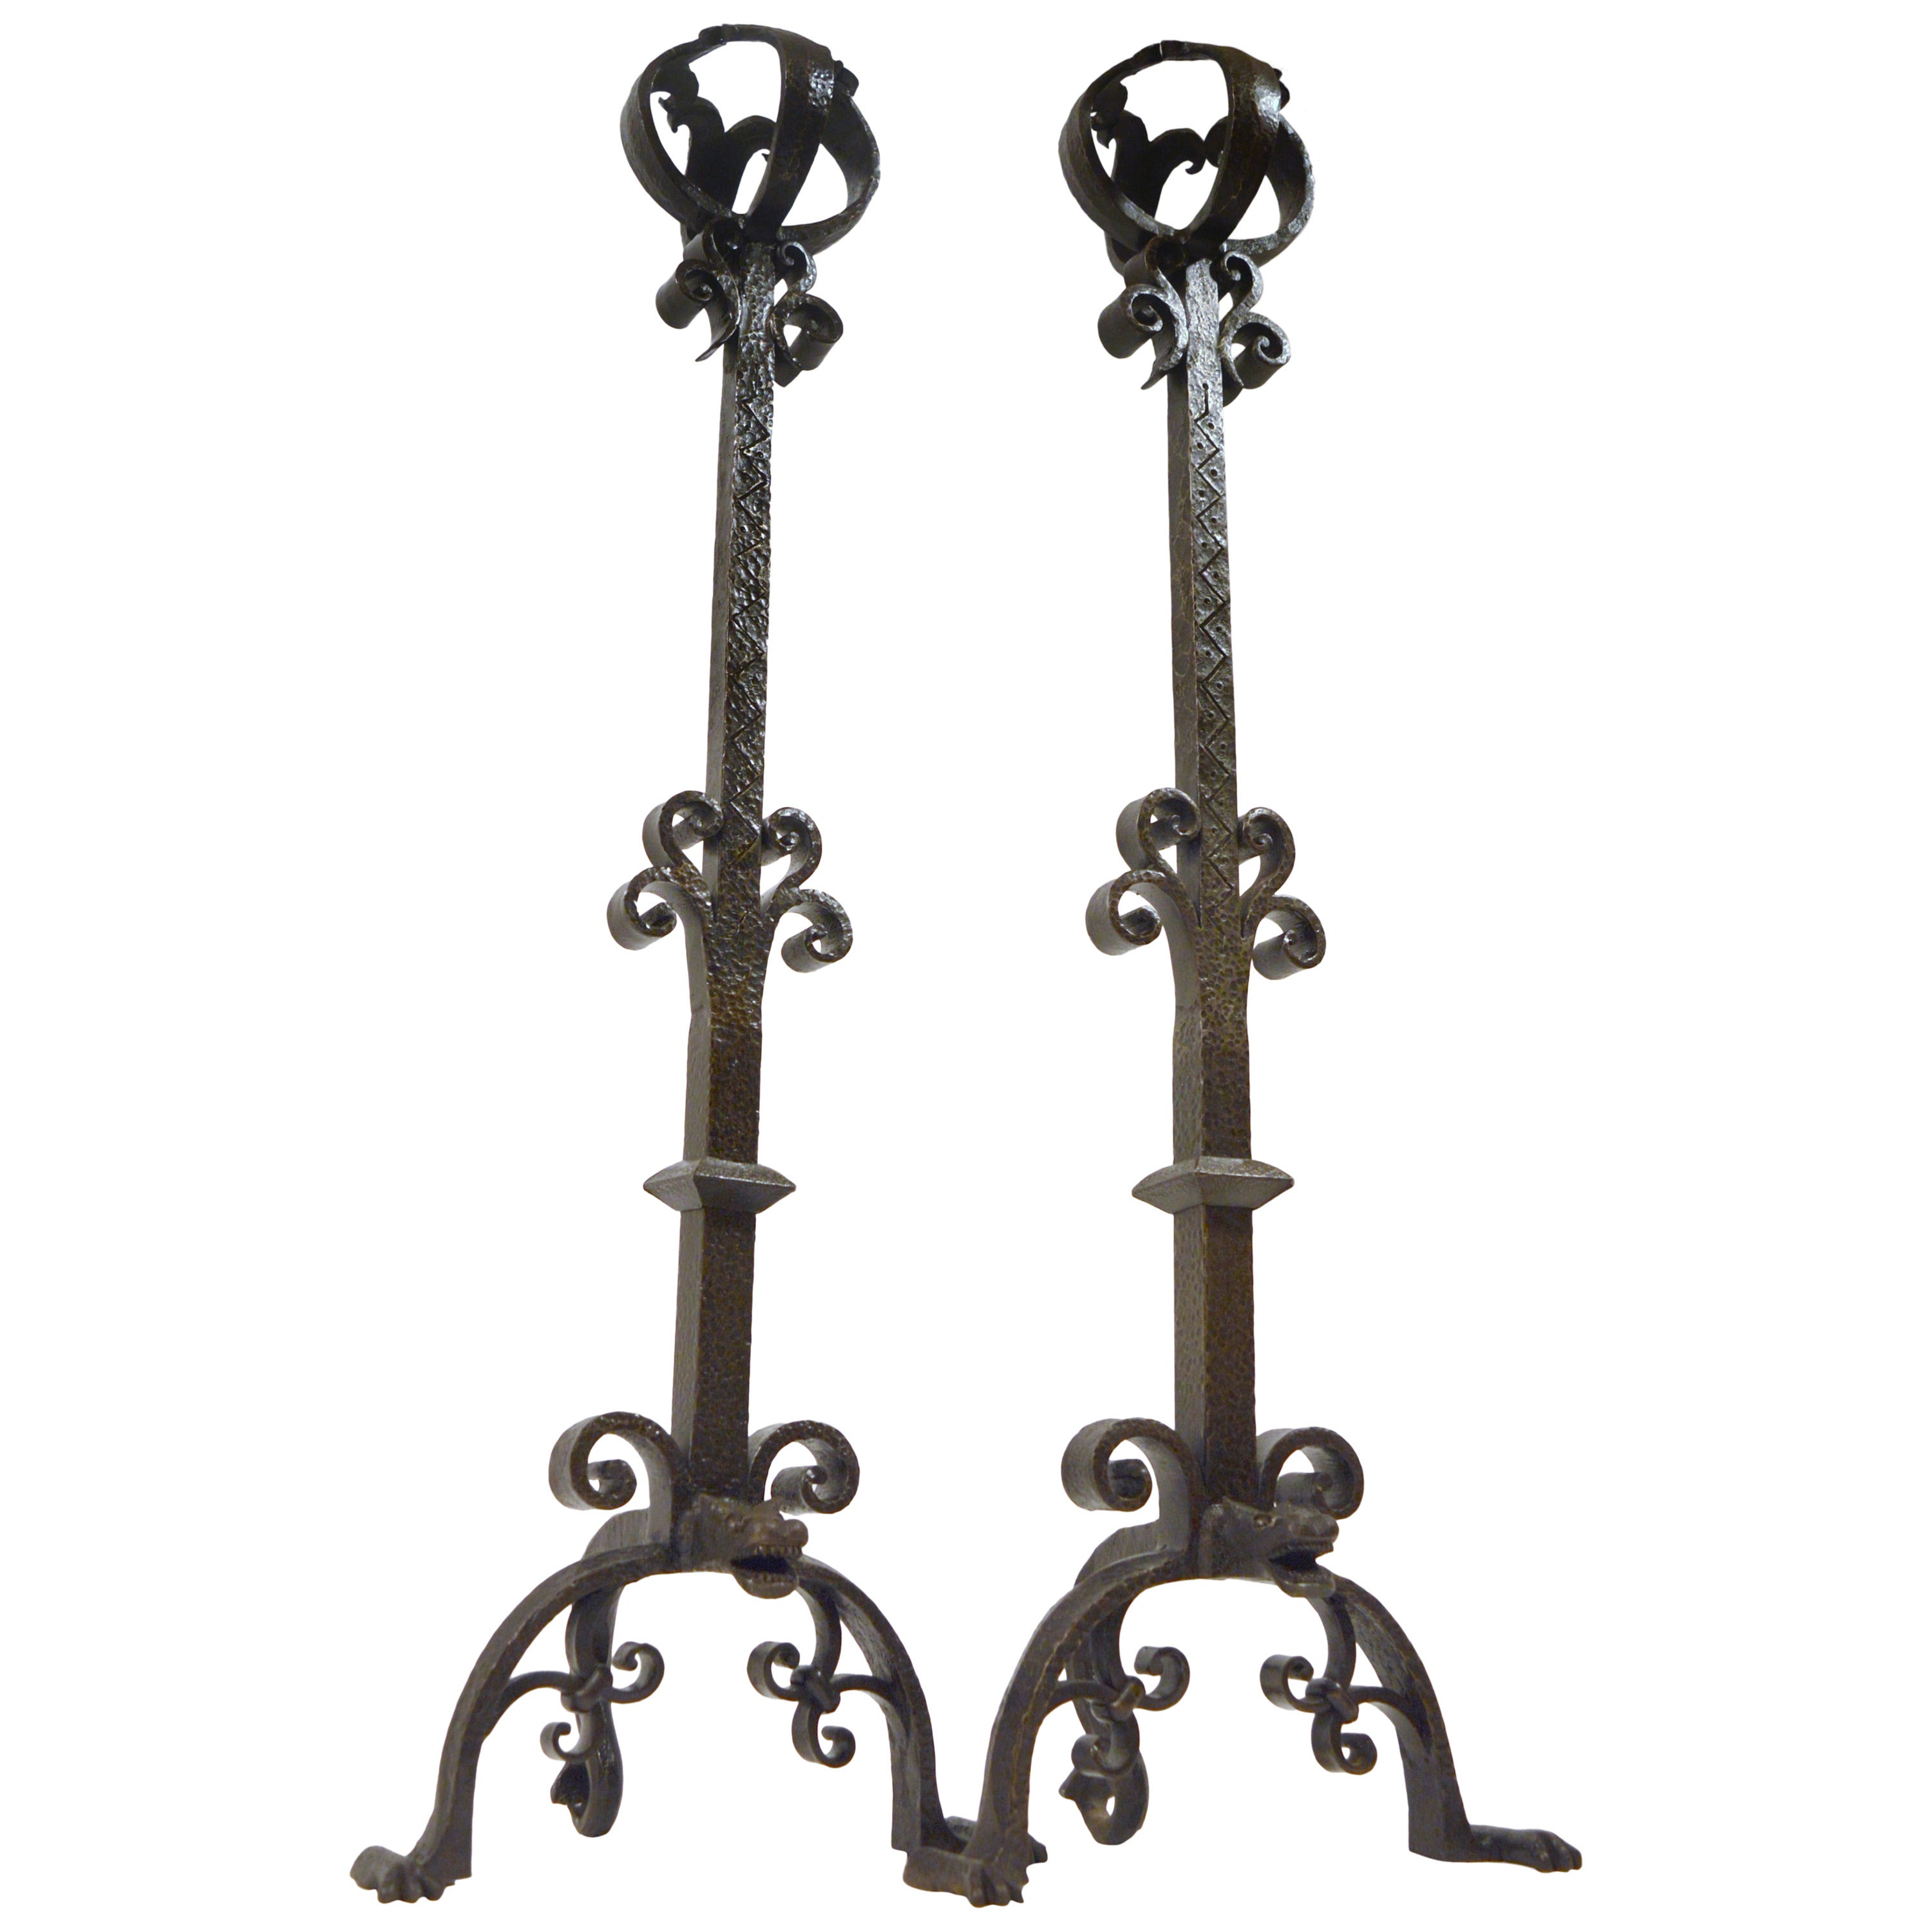 Pair of Large 1900s Iron Chenets or Andirons